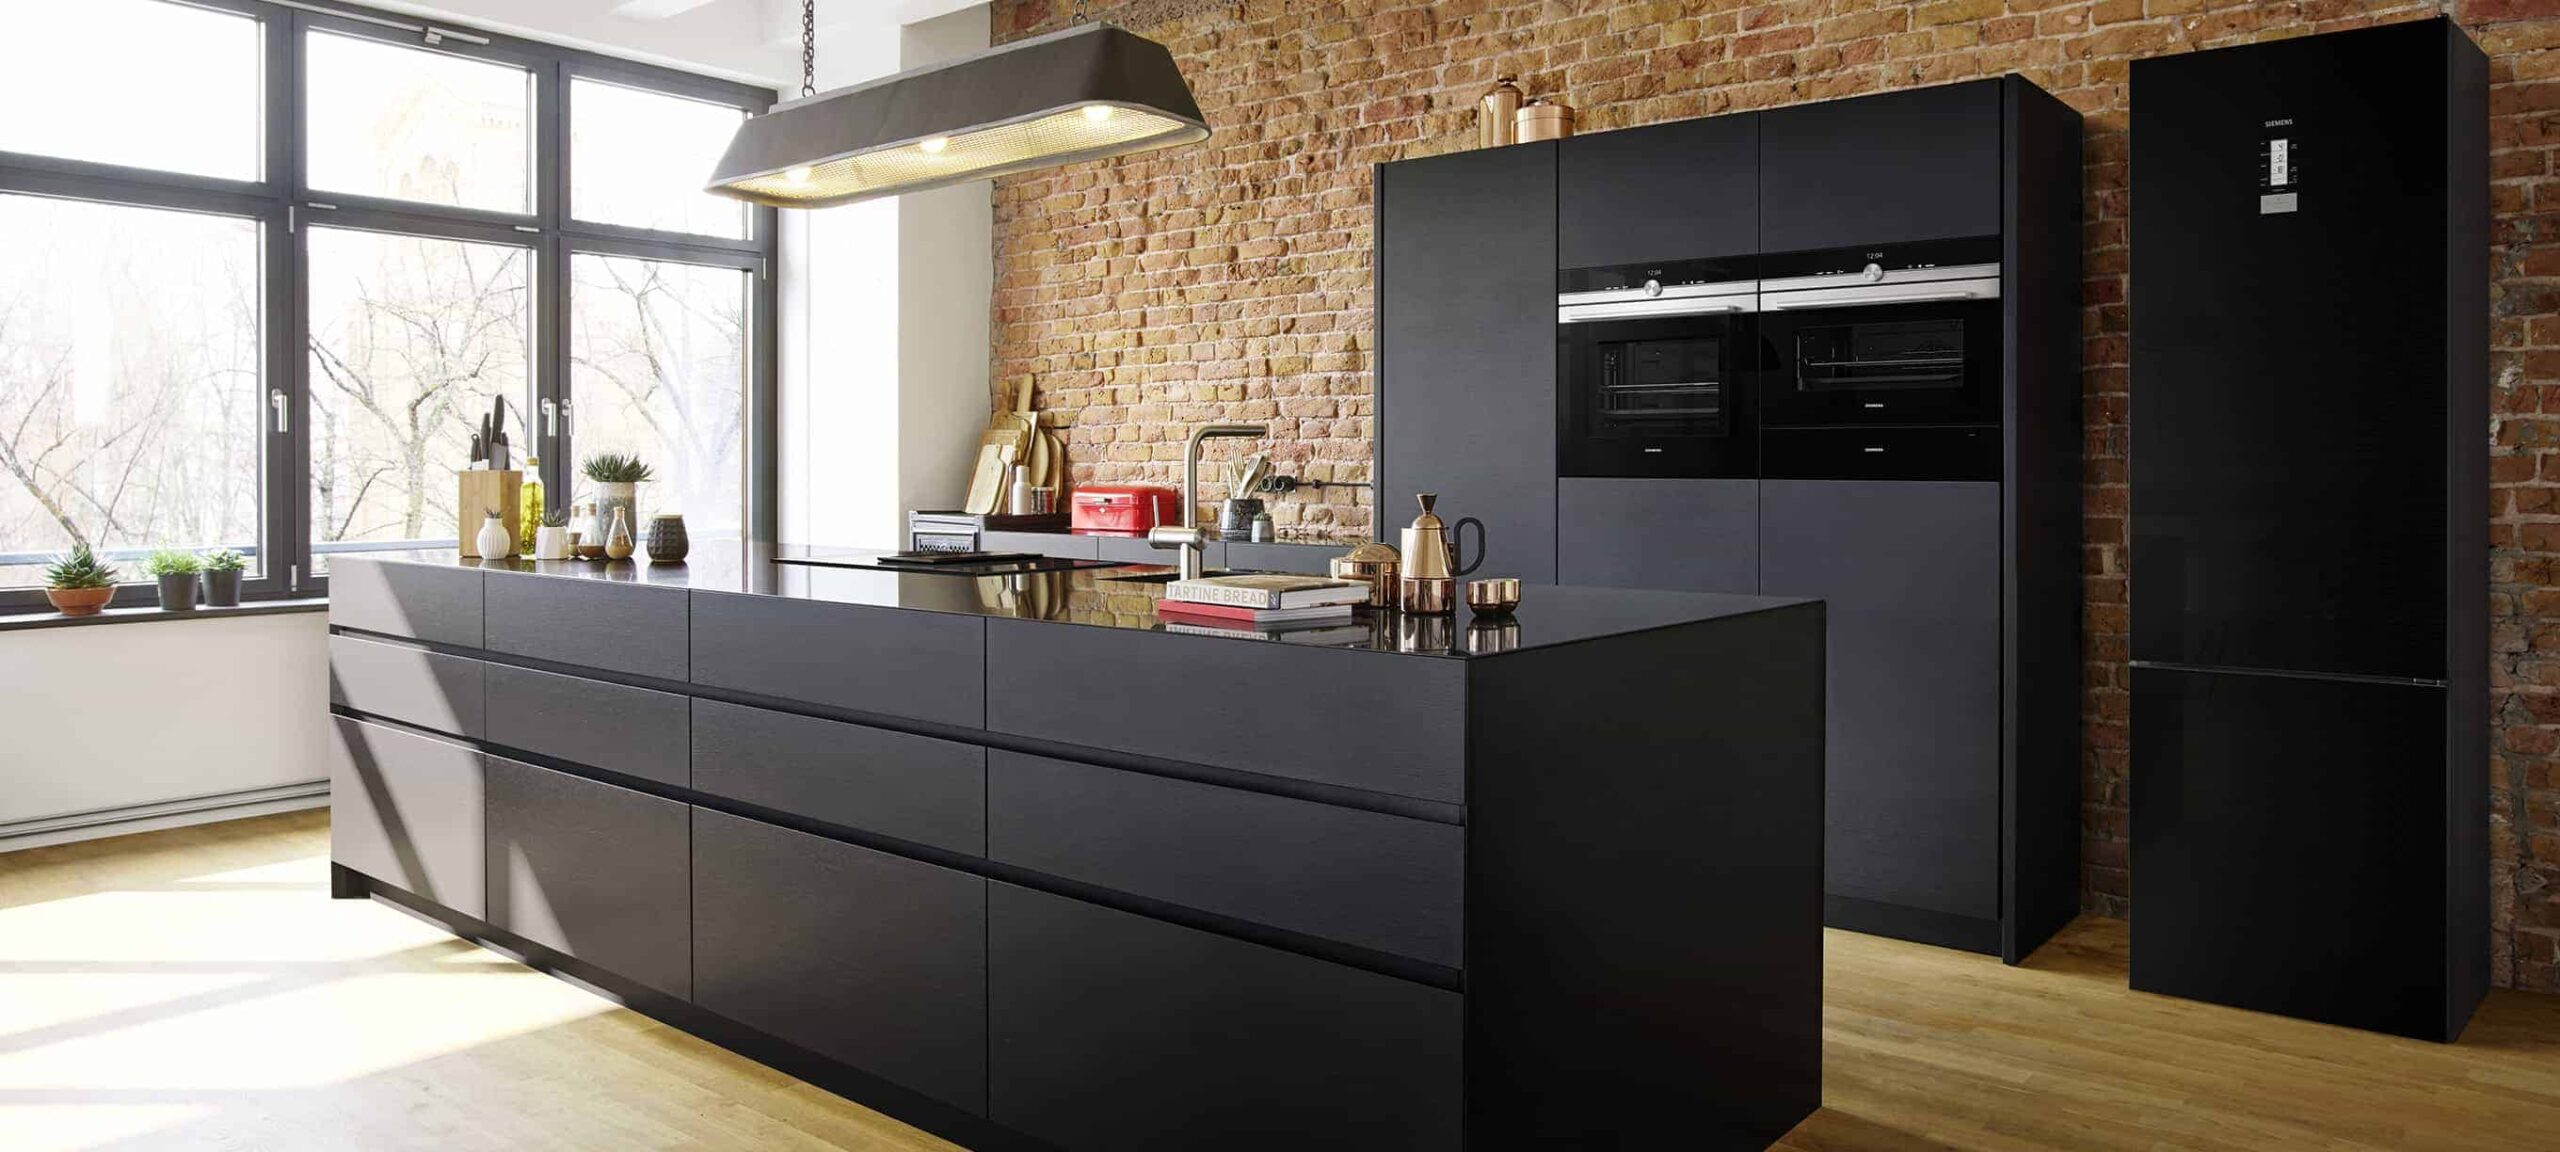 How important are built-in appliances in Indian modular kitchens?